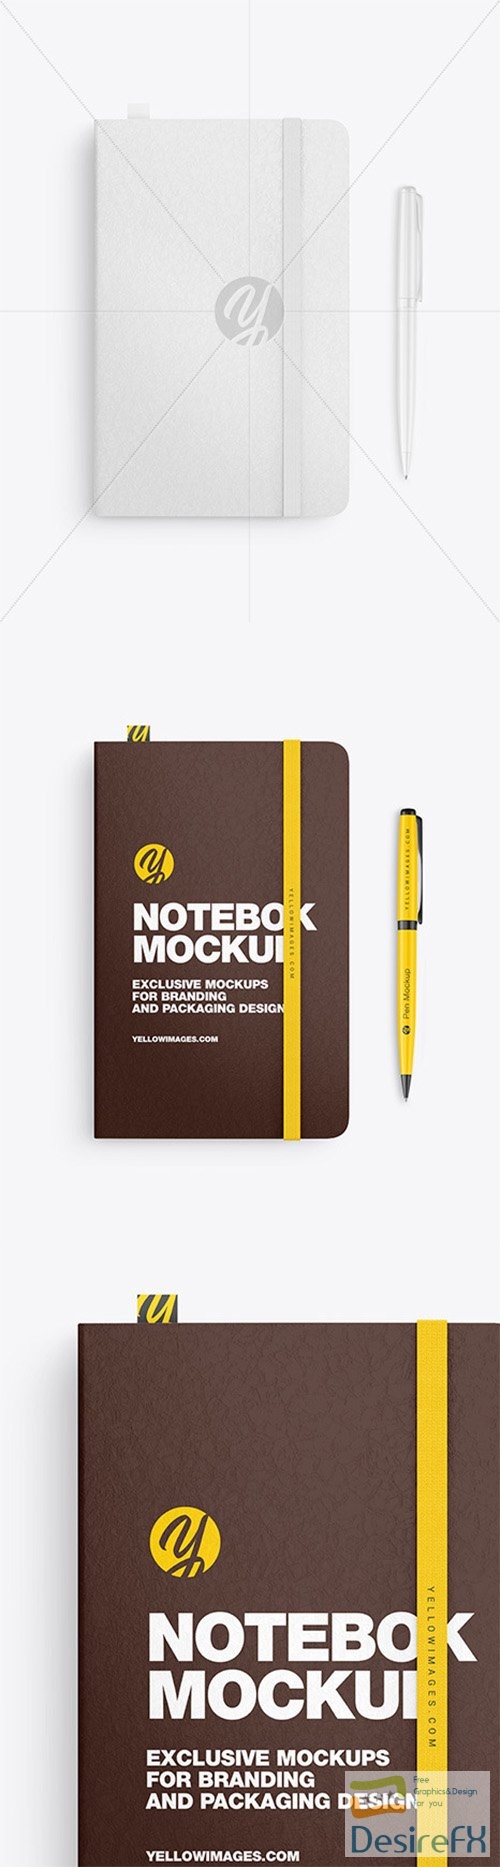 Leather Notebook with Pen Mockup 85953 TIF